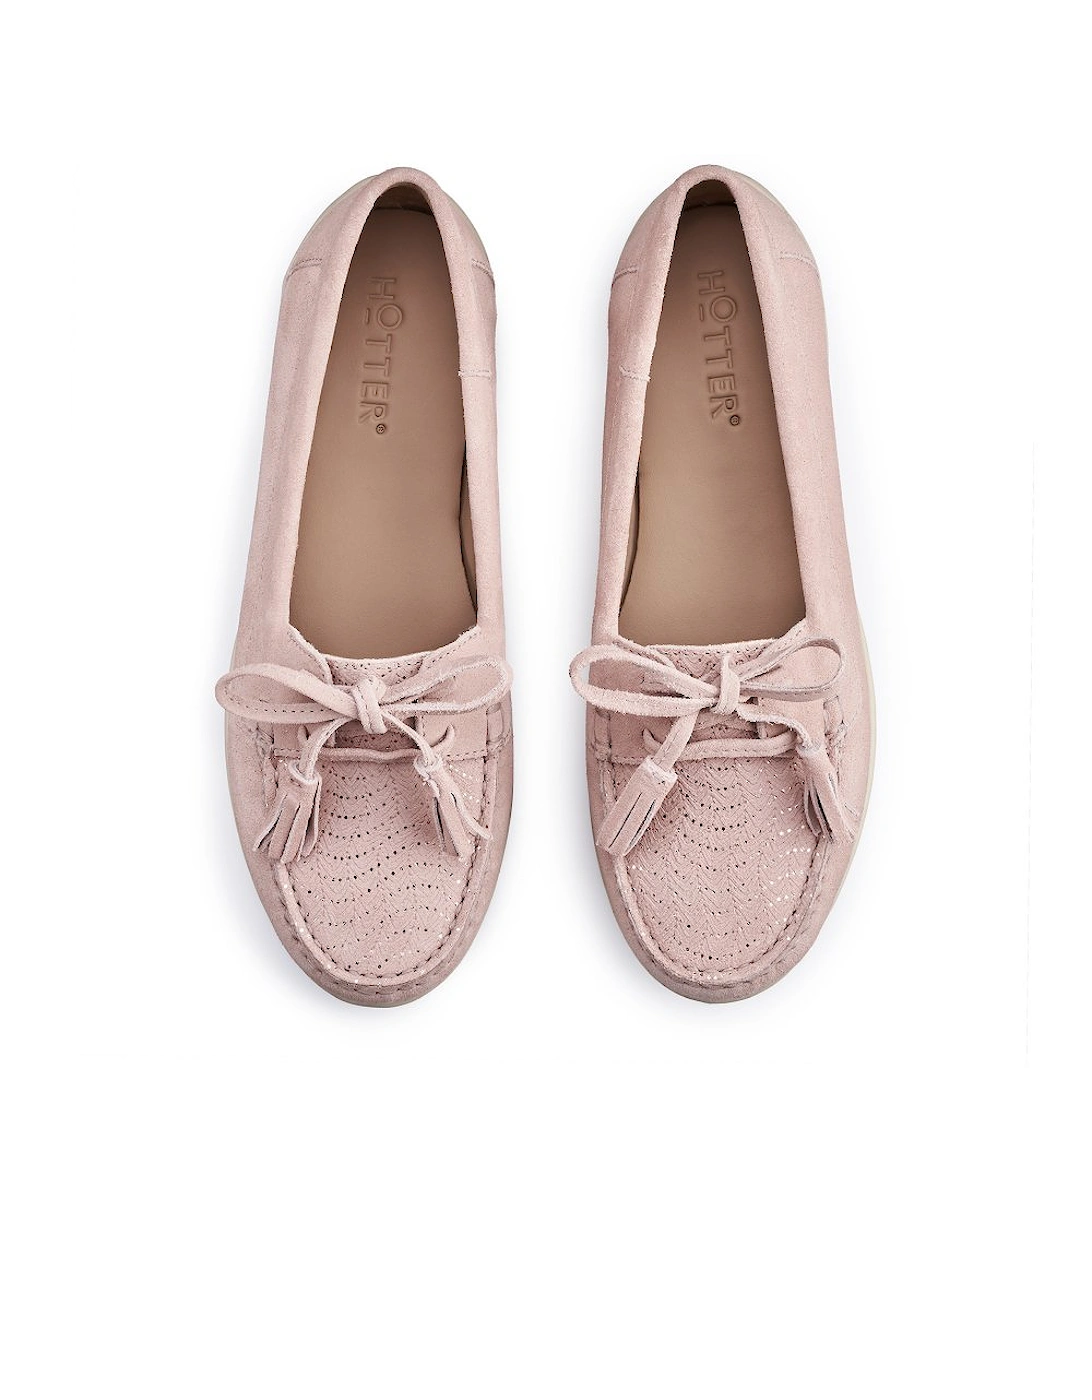 Bay Womens Loafers